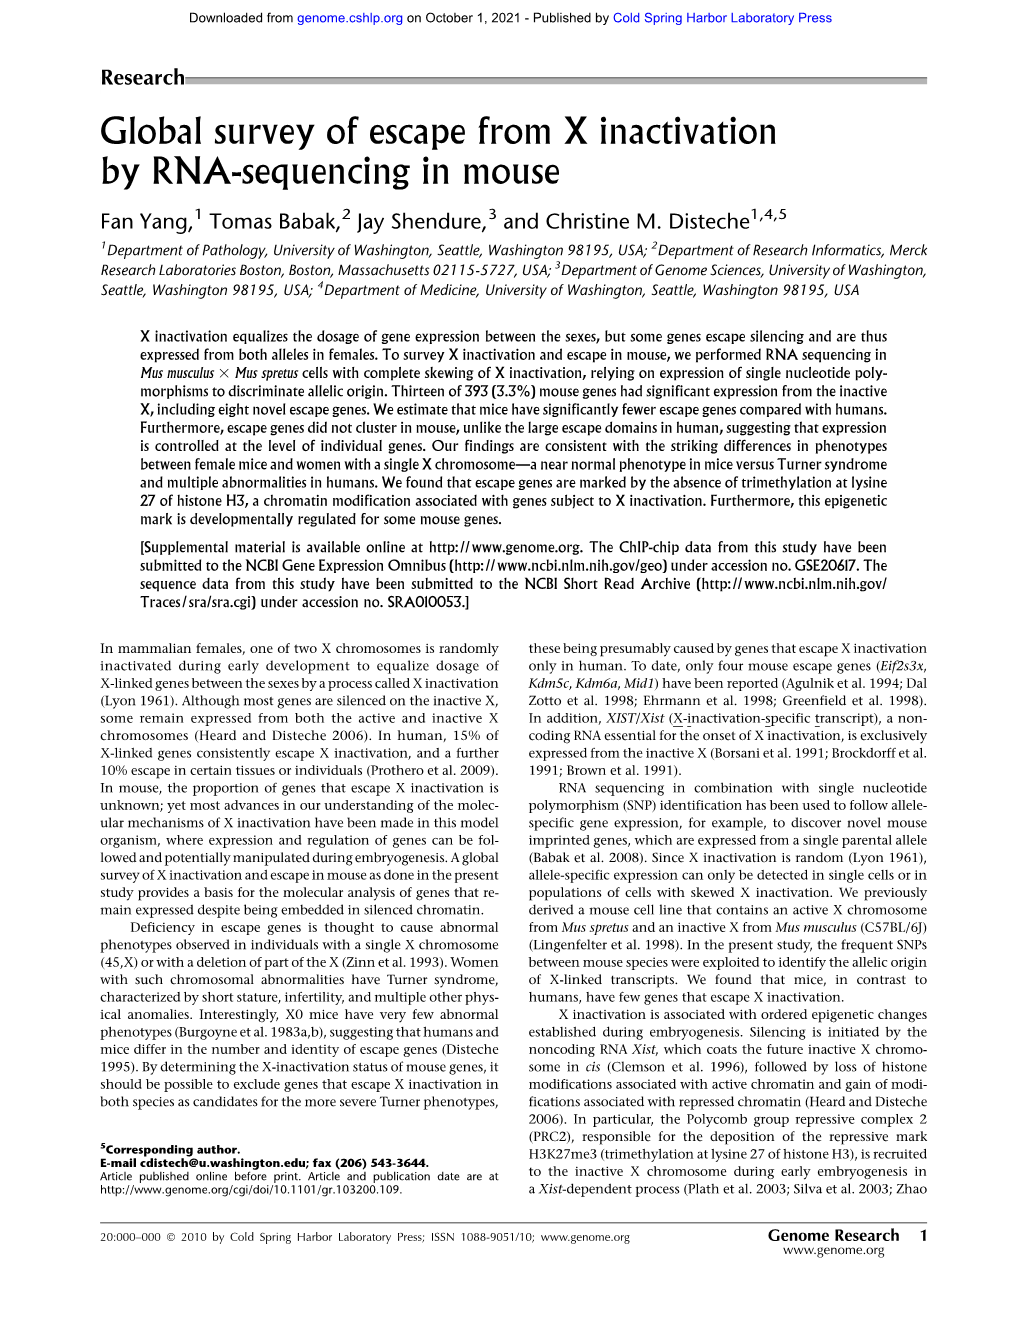 Global Survey of Escape from X Inactivation by RNA-Sequencing in Mouse